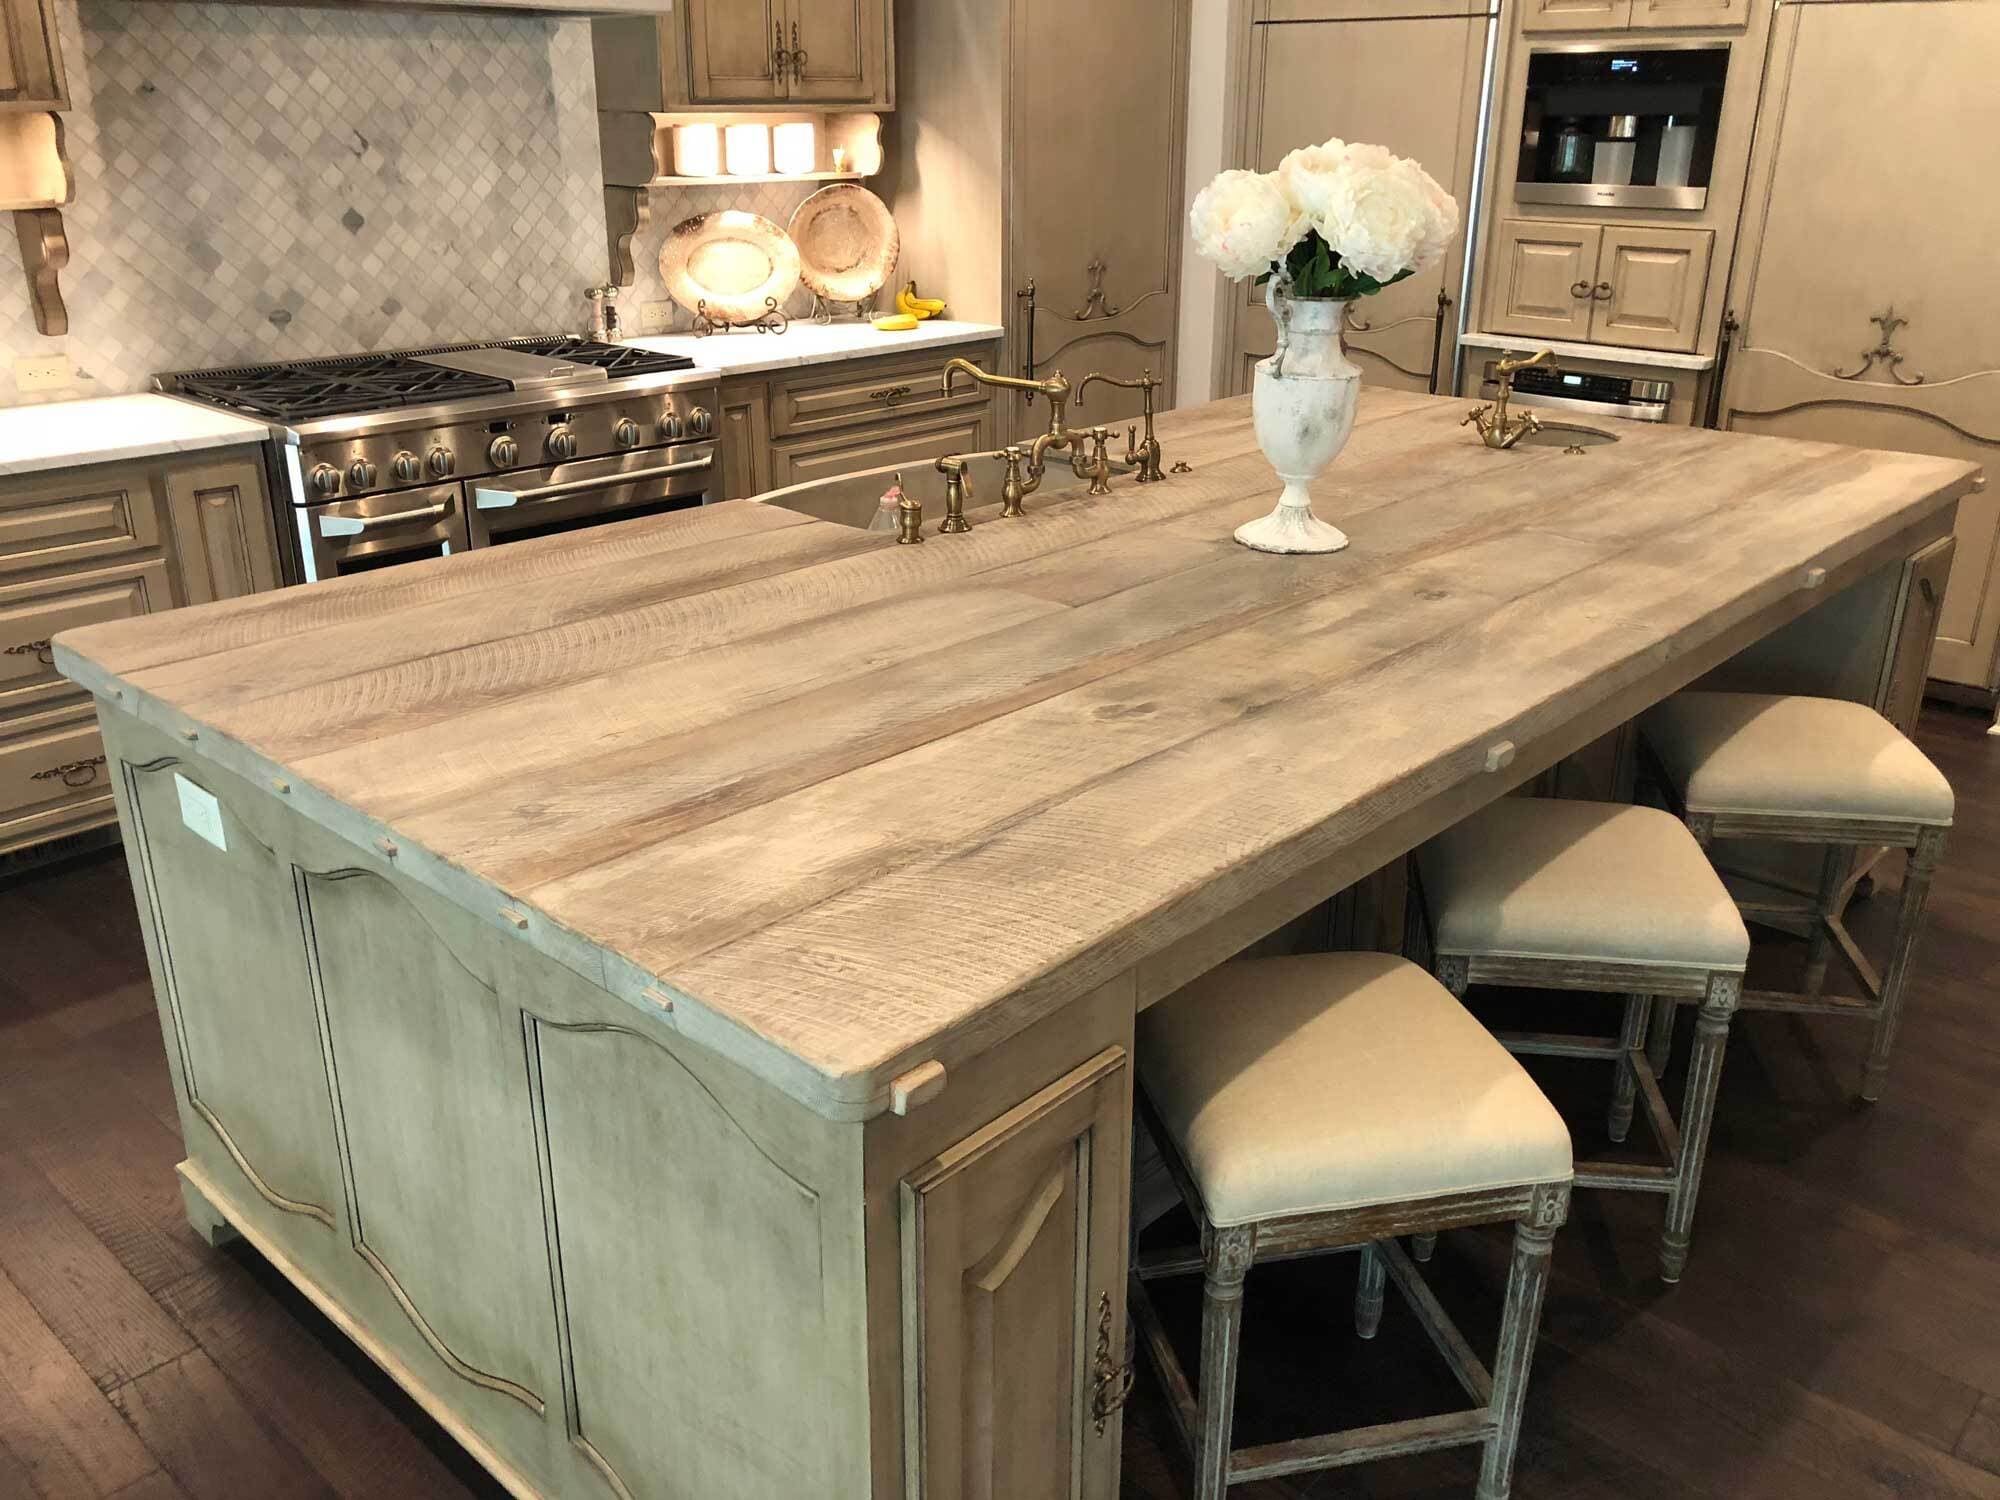 Reclaimed wood countertop for kitchen island.